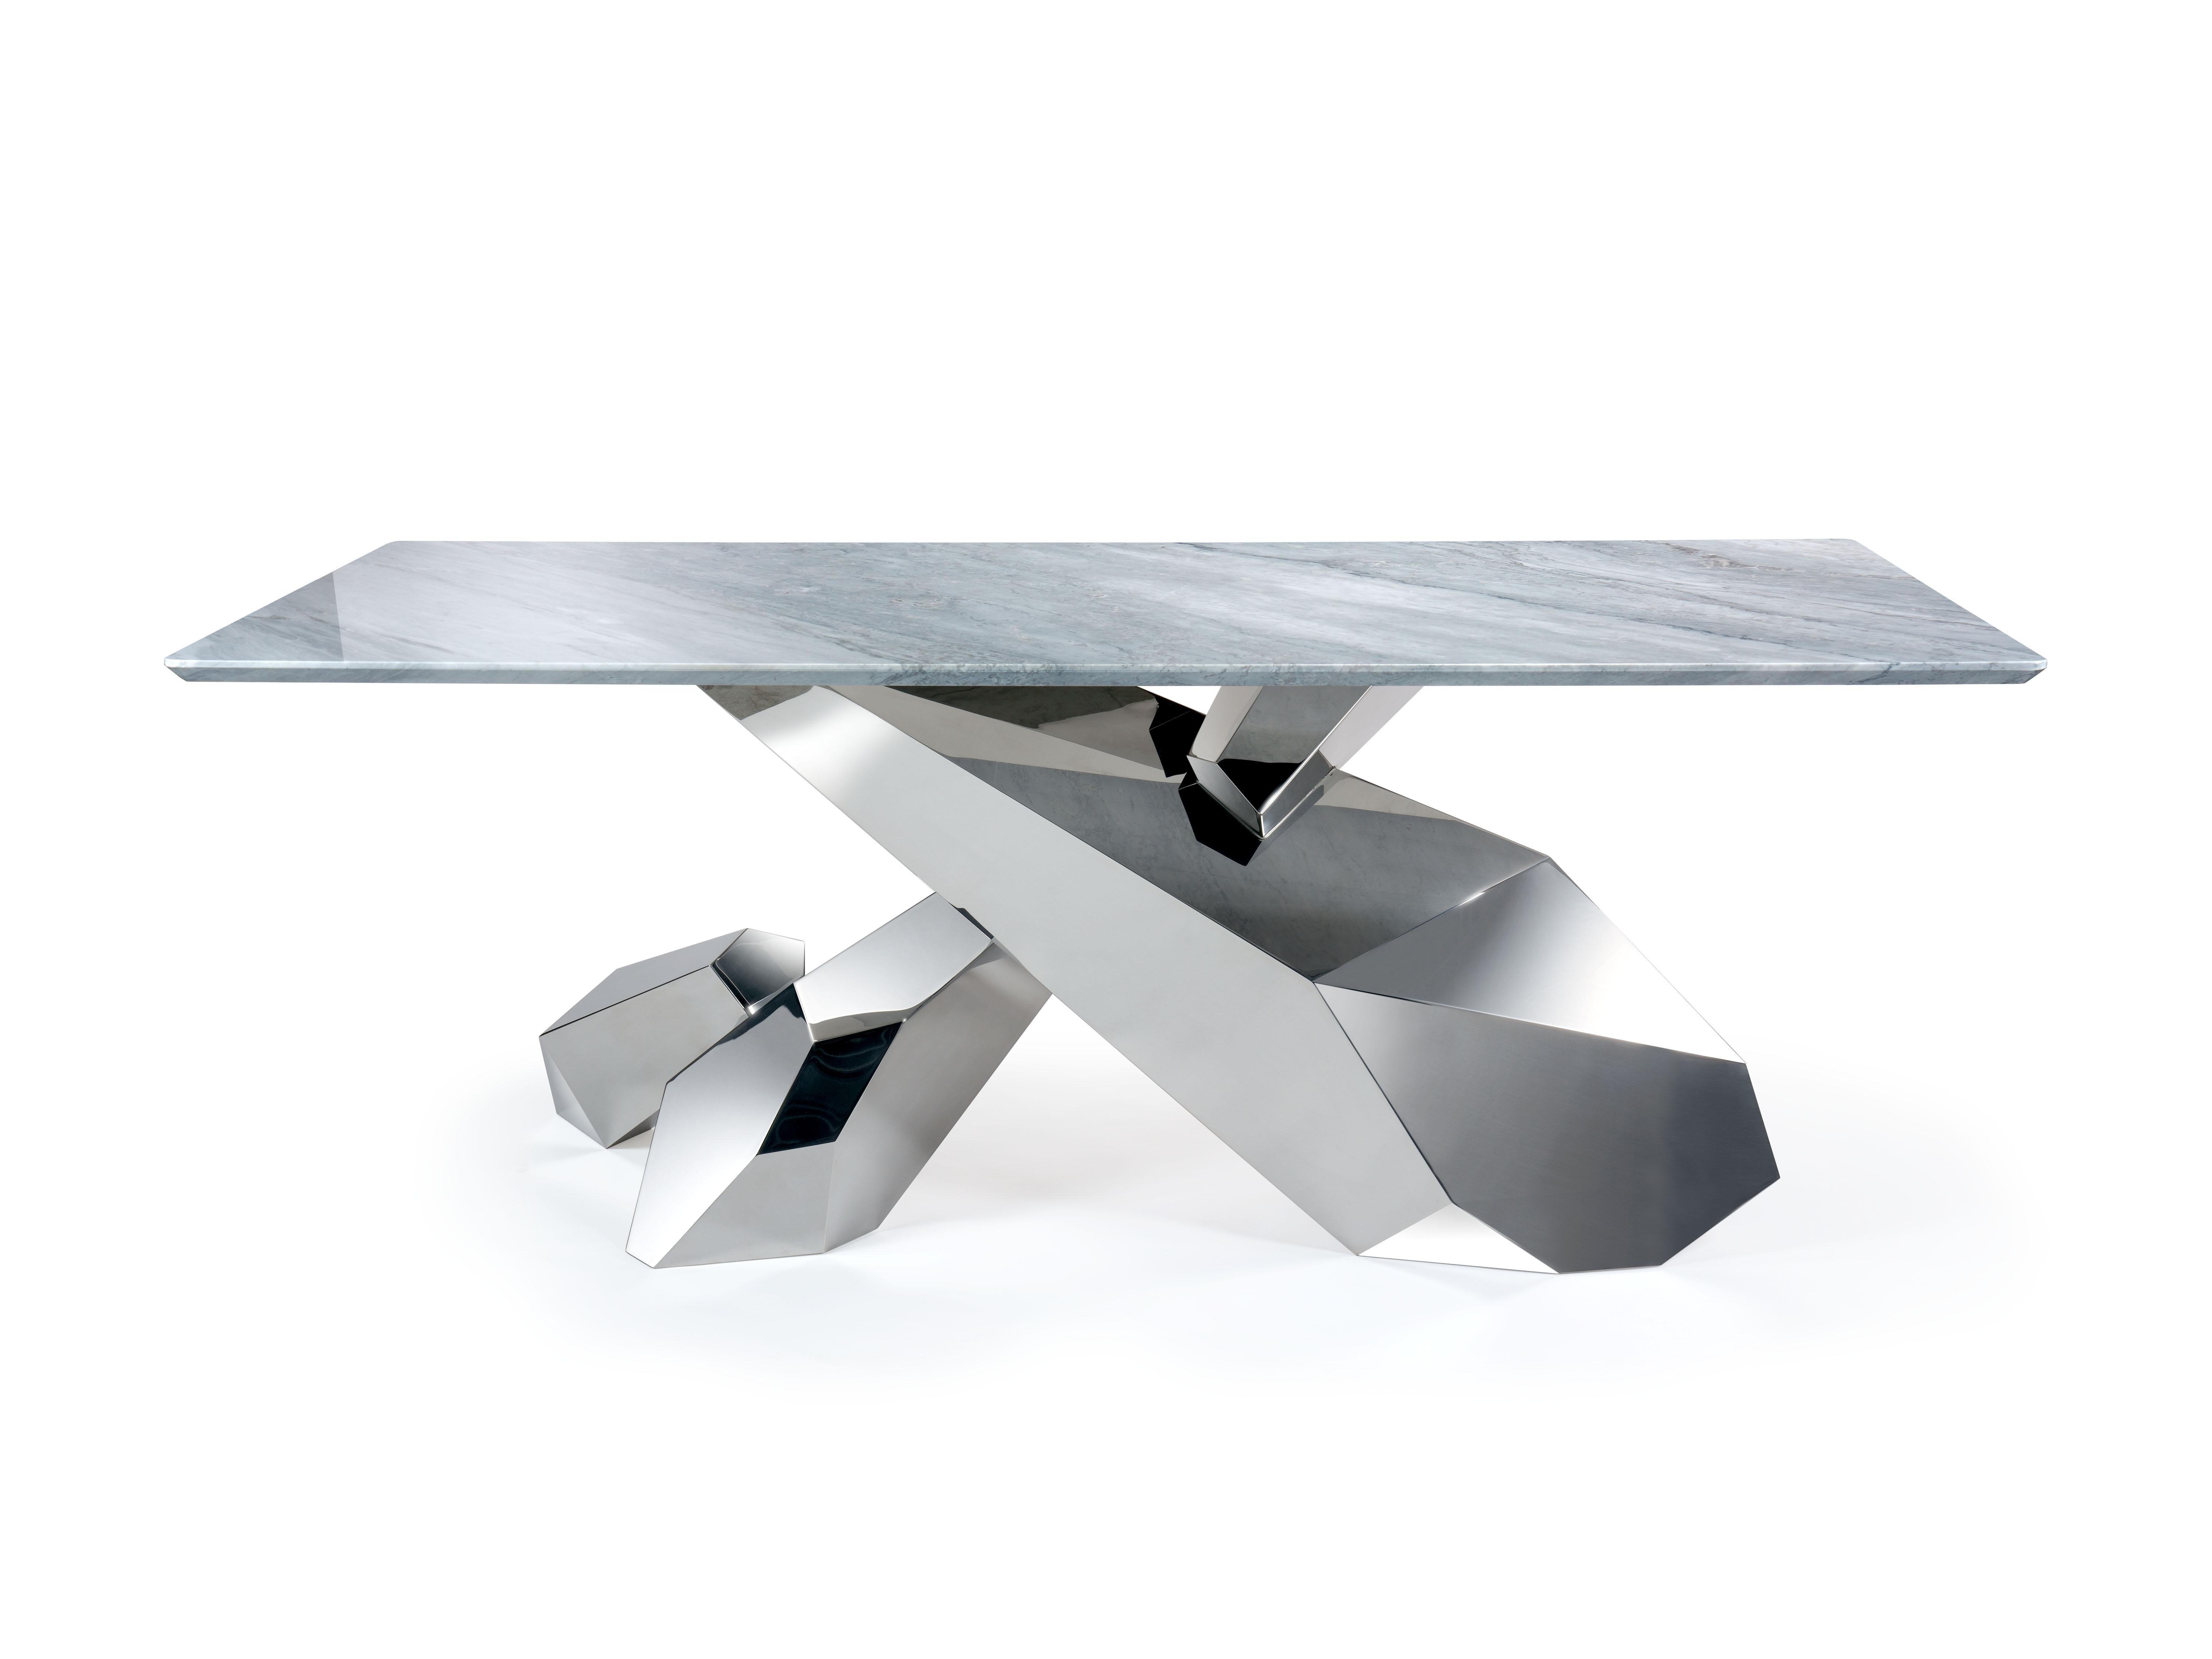 The table 'Gallio' is an important desk with structure in mirror polished stainless steel and top in grey Versylis marble. The structure is inspired by a formation of crystals of Gallium and is made entirely by hand, from welding to